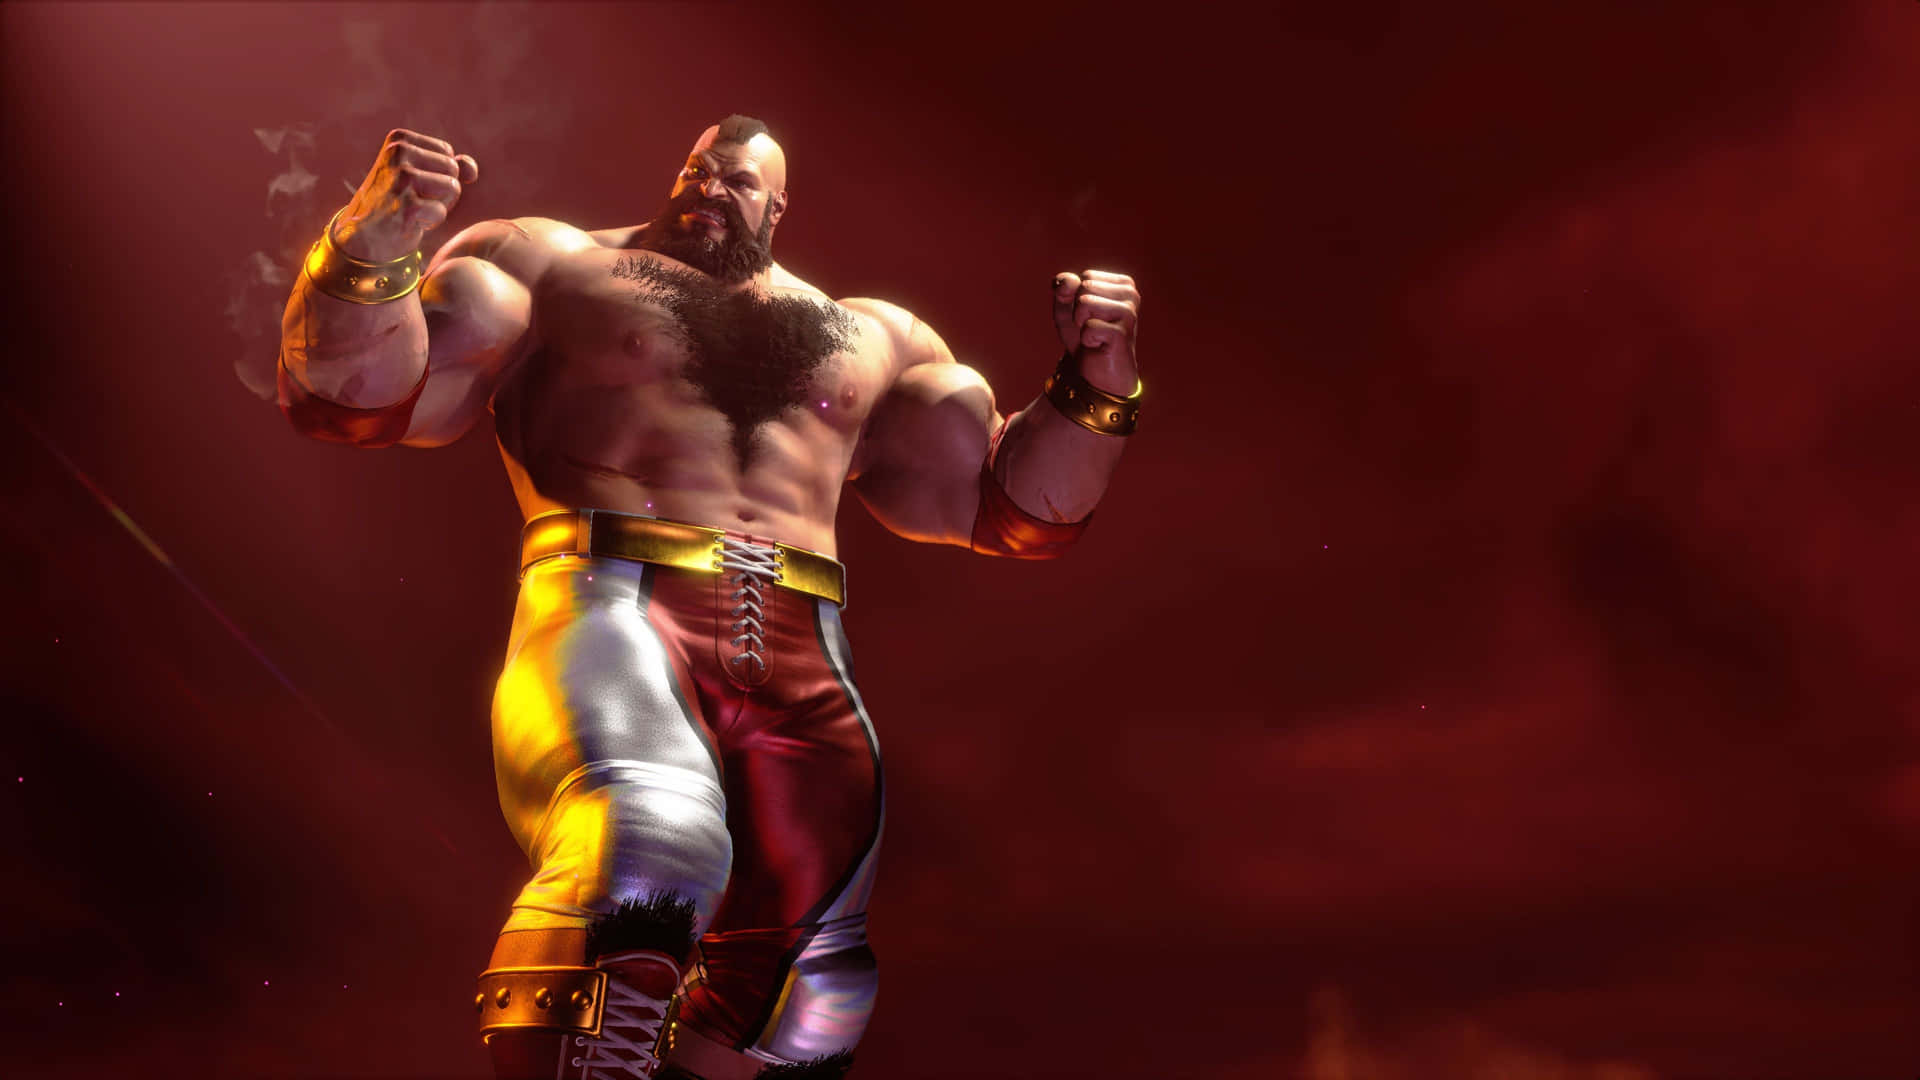 Street Fighter Zangief Victory Pose Wallpaper